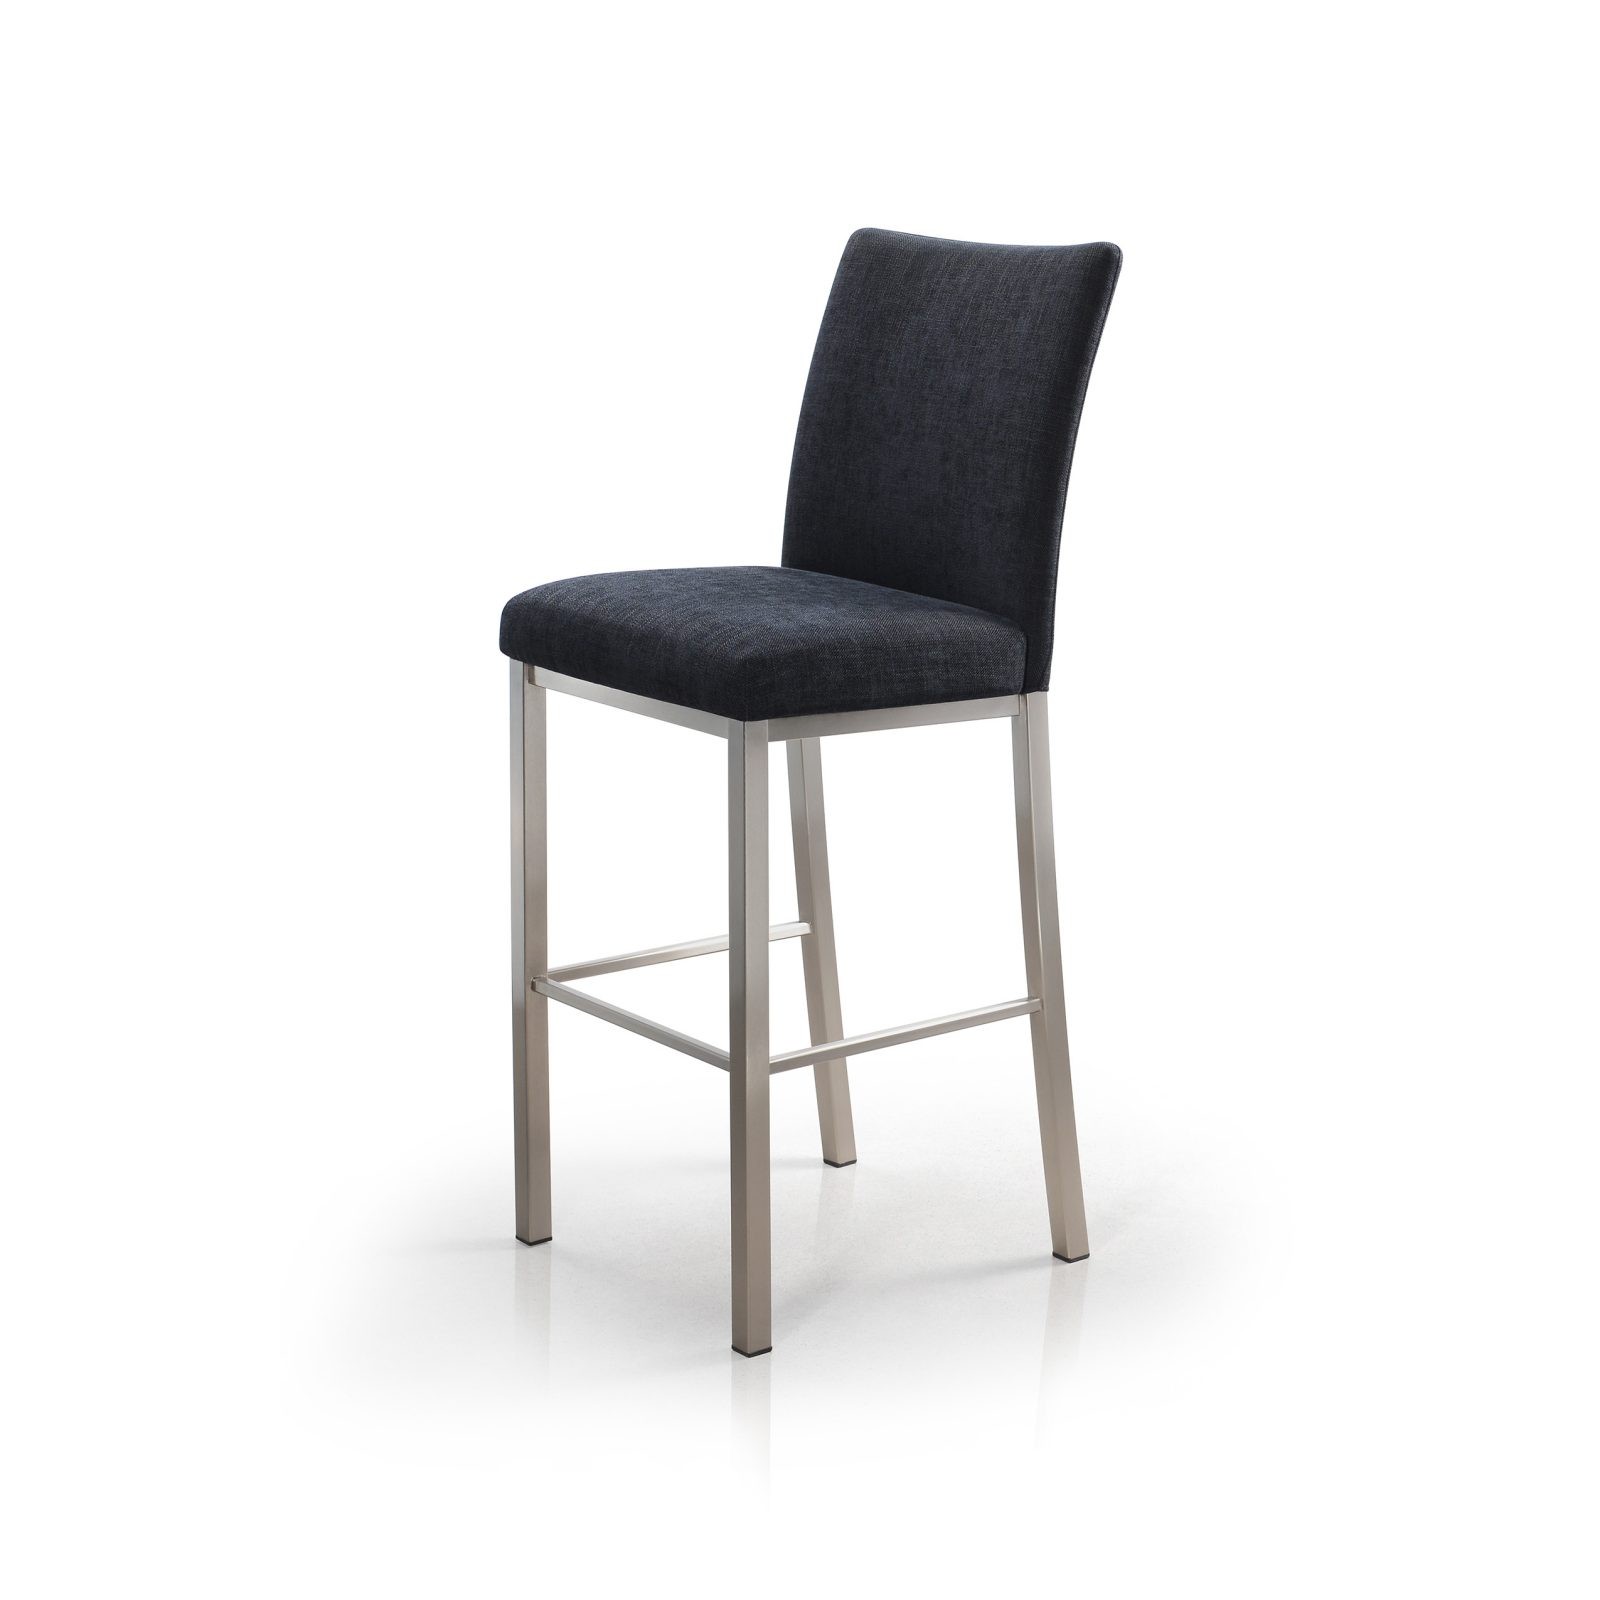 Trica Biscaro • Metal Finish: Brushed Steel • Seat and Back Cushion: Linoso Charcoal